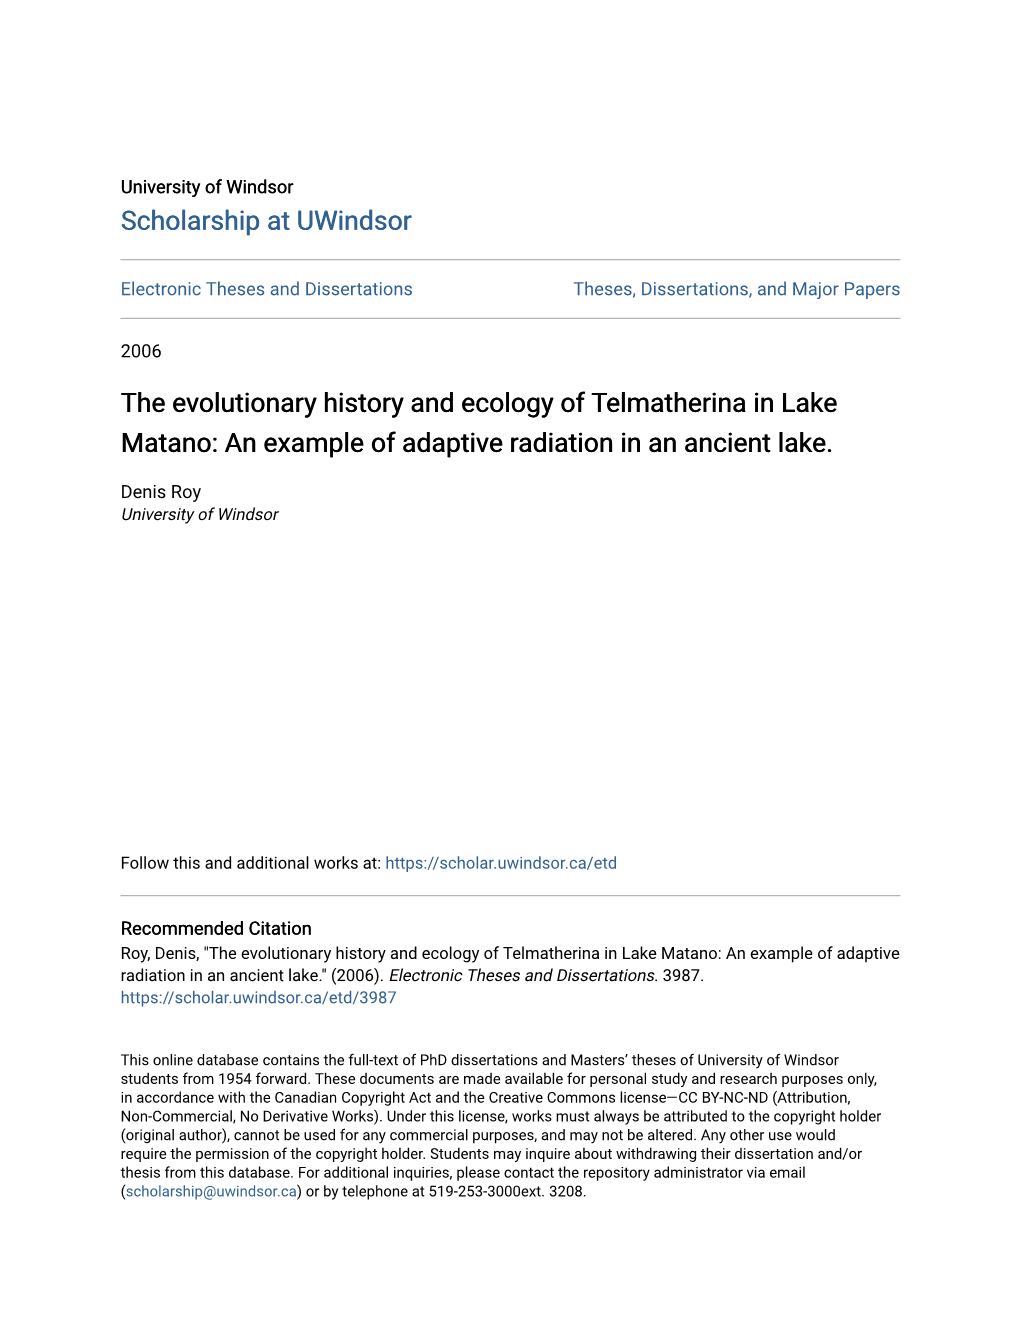 The Evolutionary History and Ecology of Telmatherina in Lake Matano: an Example of Adaptive Radiation in an Ancient Lake